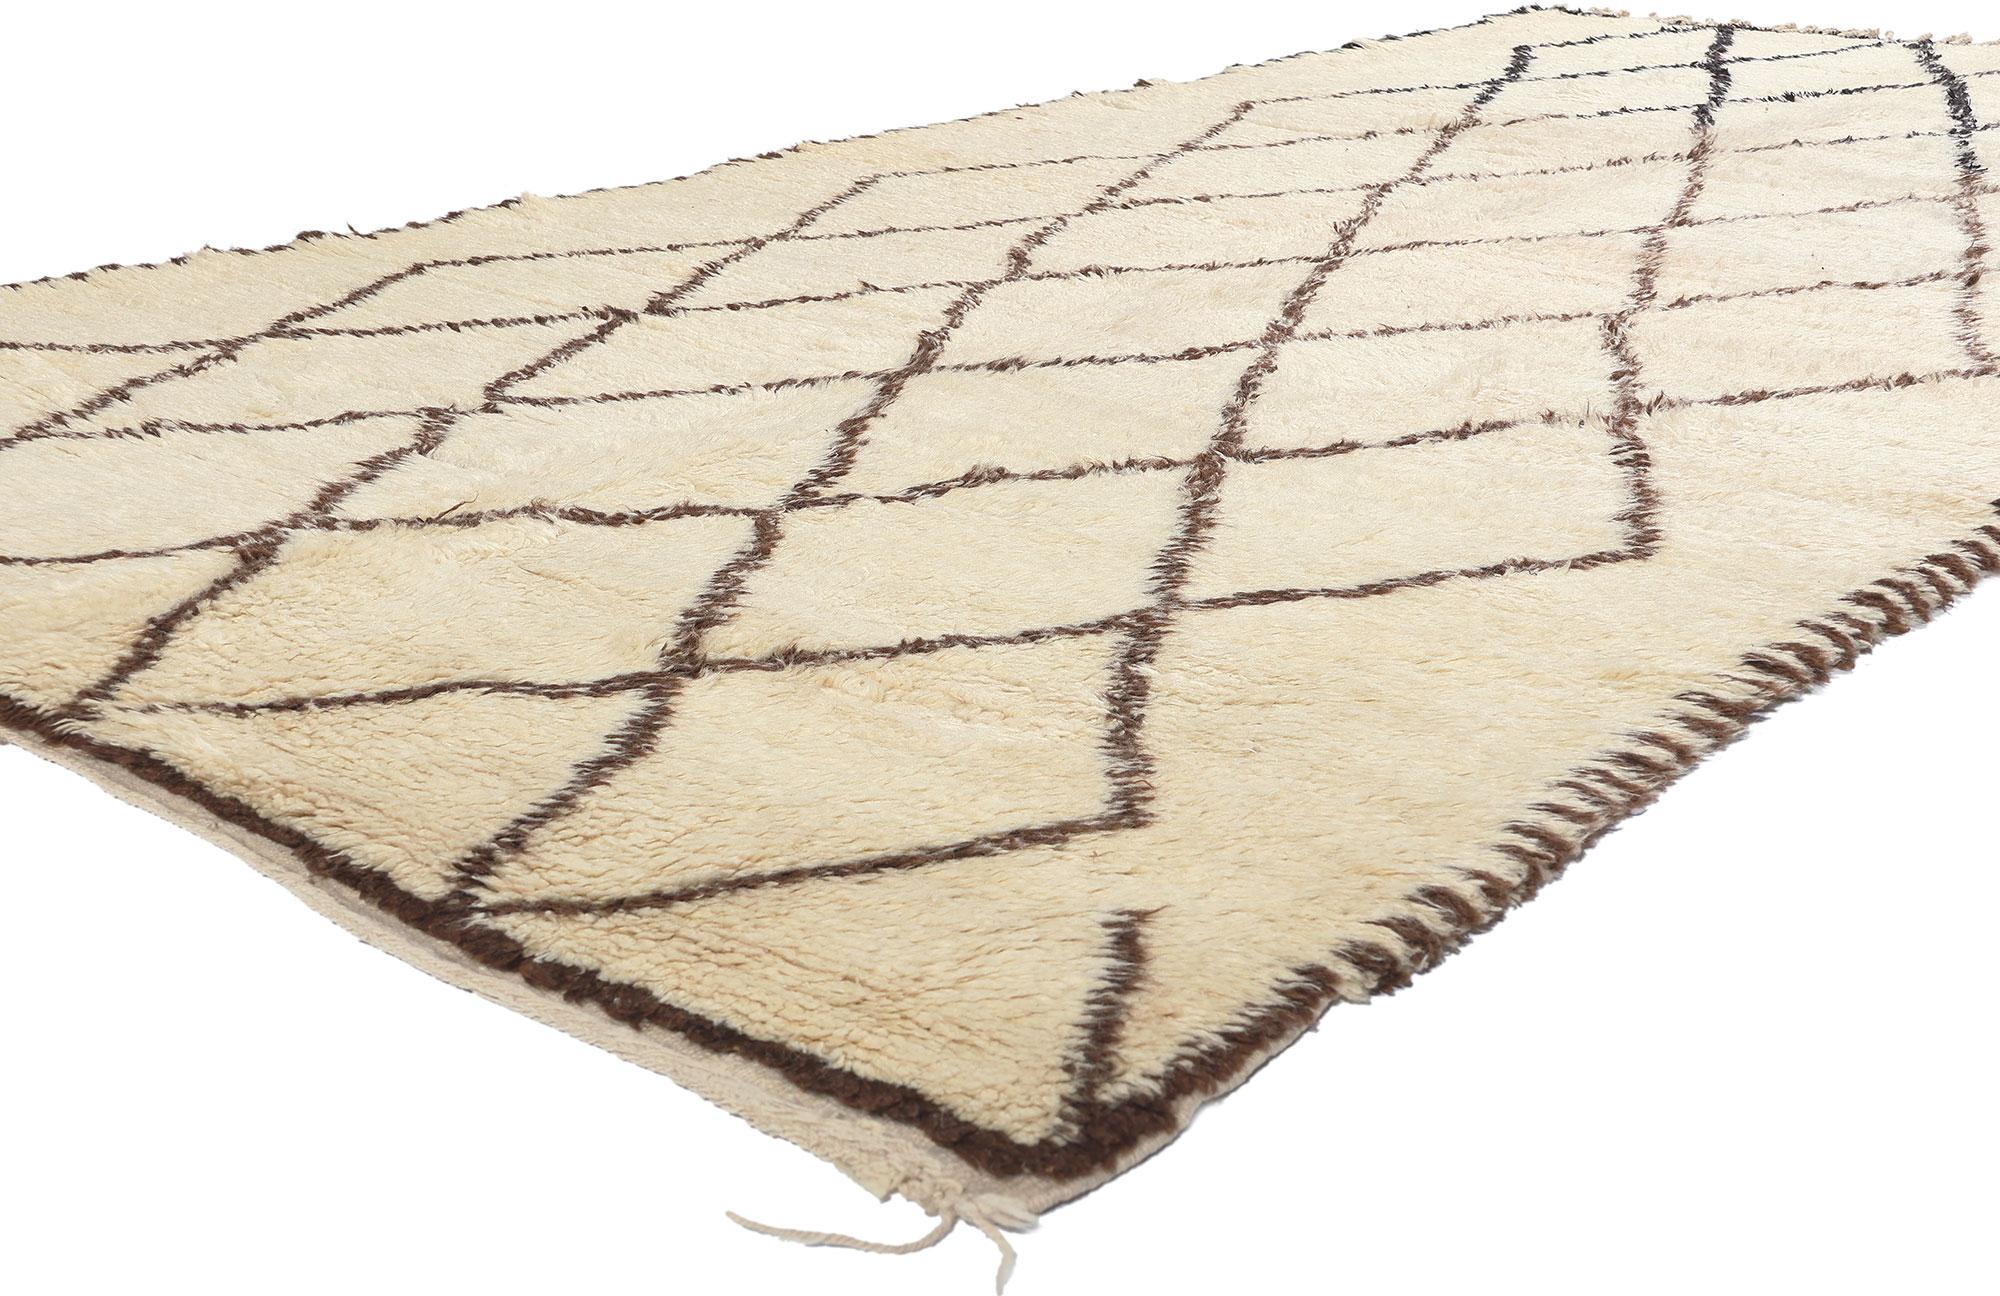 21356 Vintage Beni Ourain Moroccan Rug, 05'08 x 10'08. Originating from the Beni Ourain tribe, an integral part of the broader Berber ethnic group in Morocco, these Moroccan rugs are meticulously crafted using natural, undyed sheep's wool,